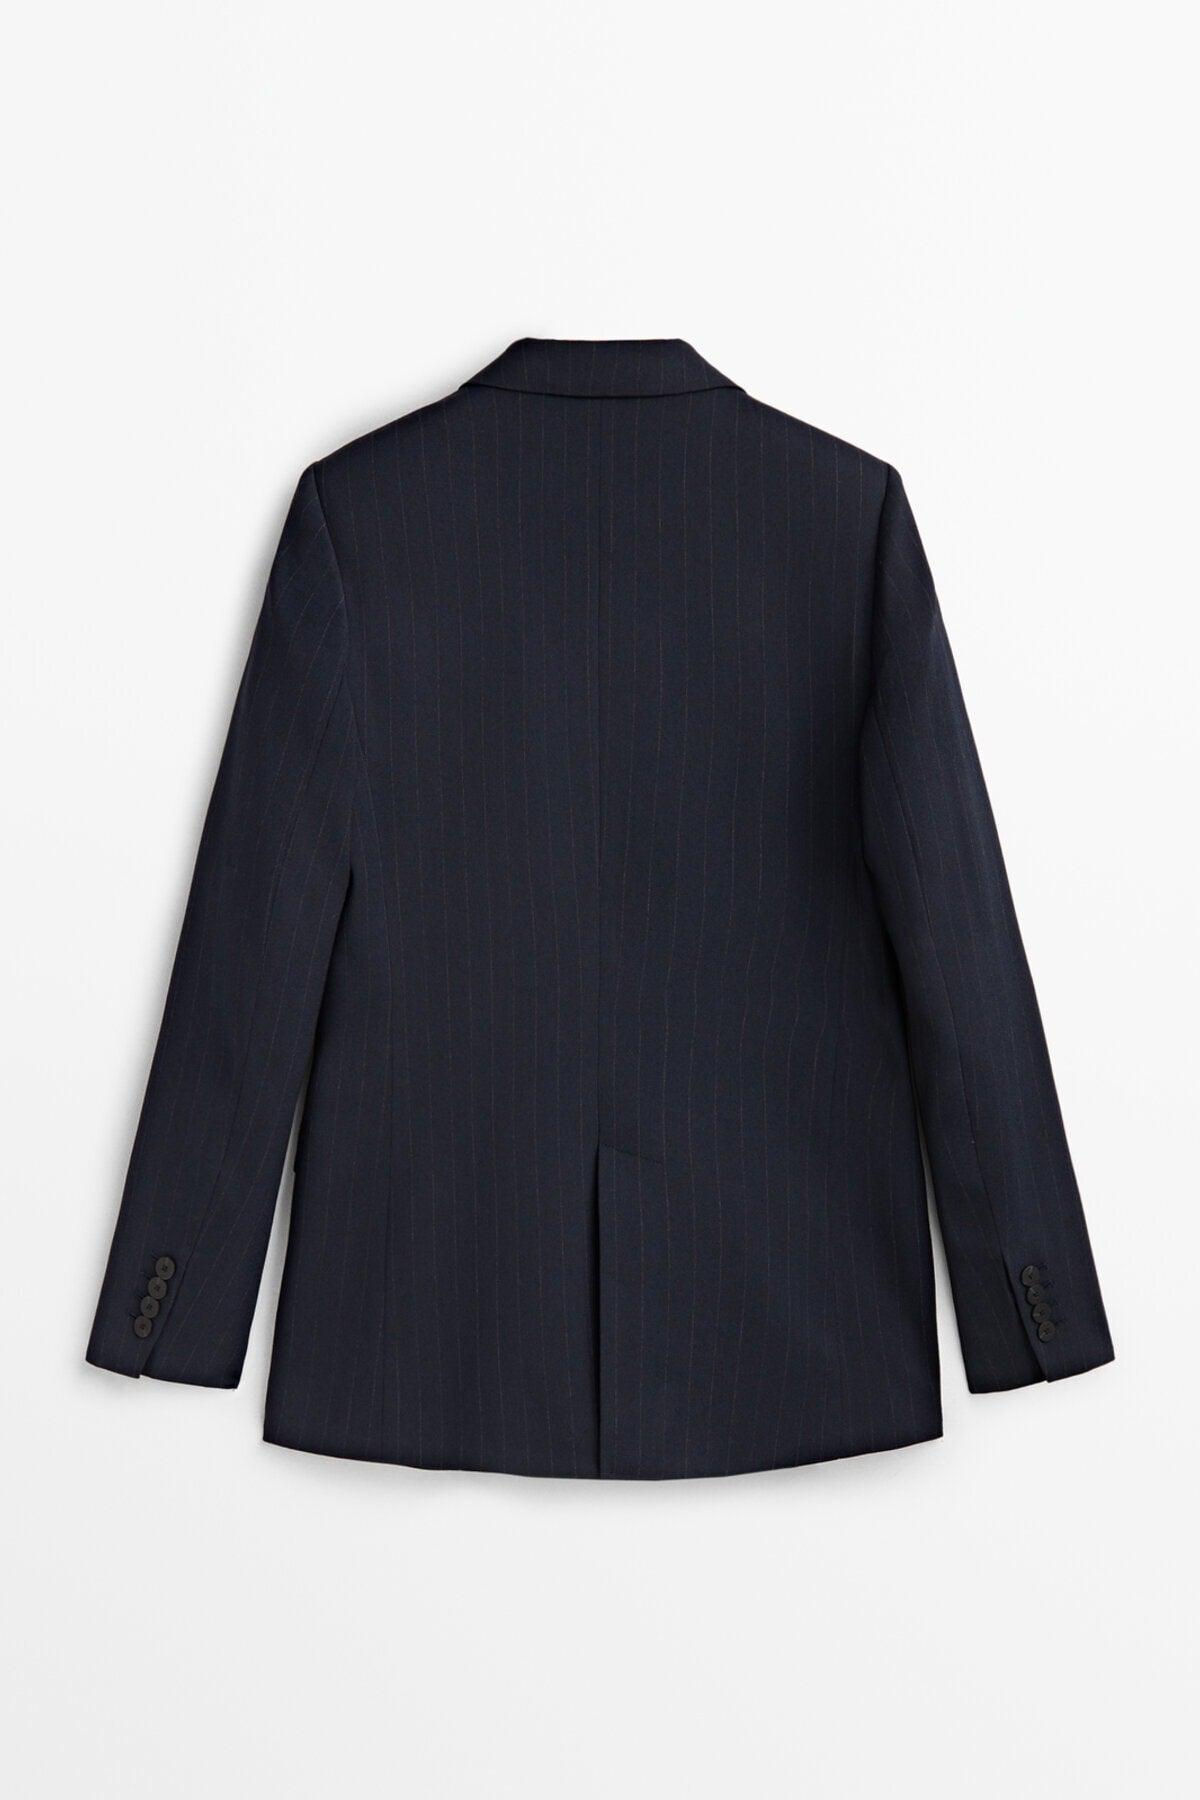 Pinstripe Classic Blazer with Decorative Double Breasted Design - Swordslife